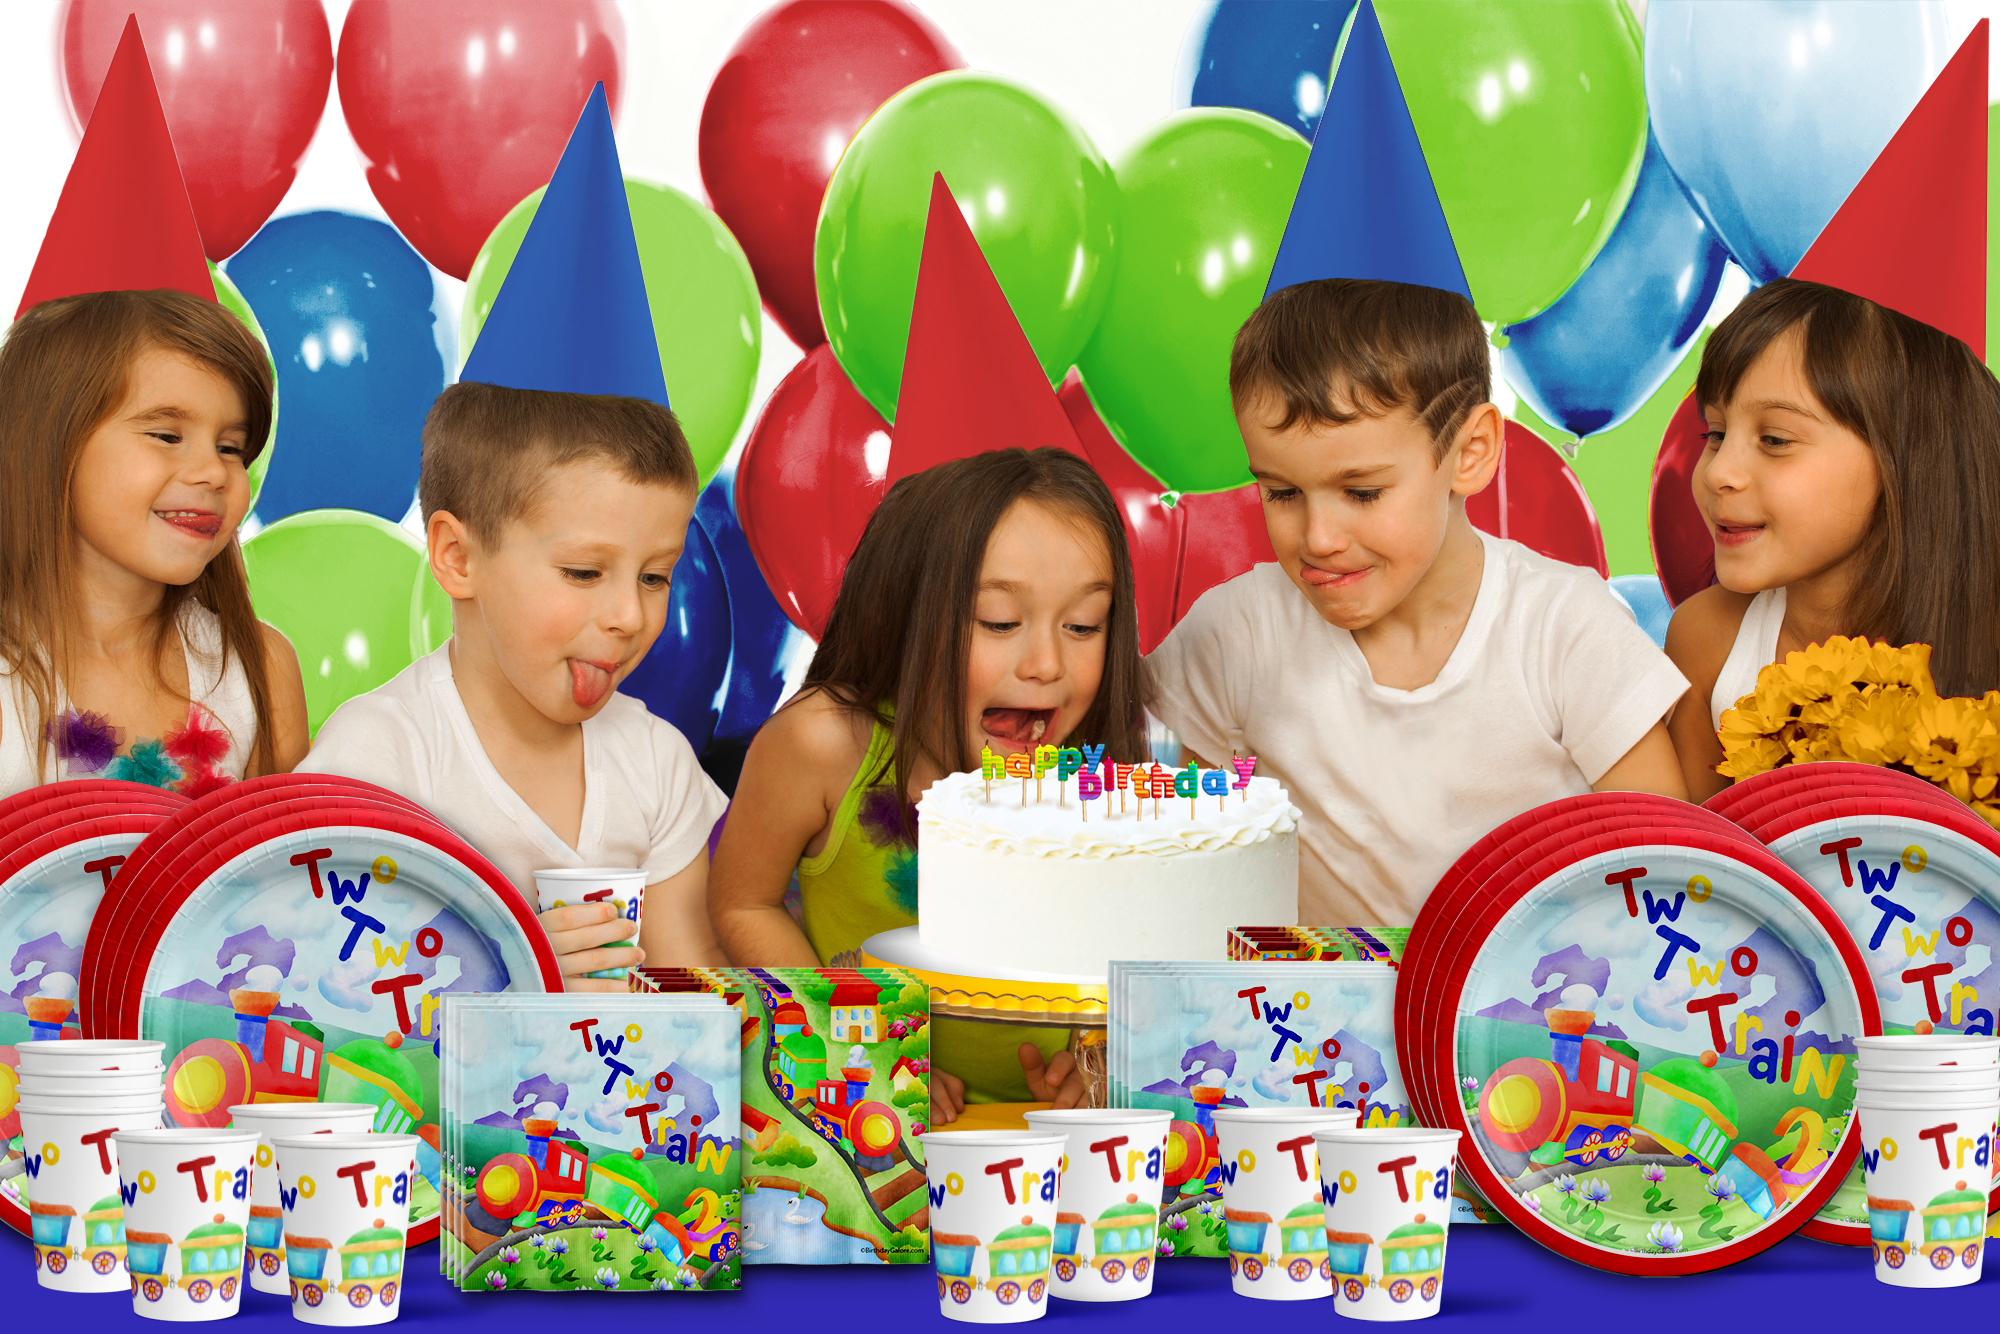 Two Two Train 2nd Birthday Party Tableware Kit For 16 Guests